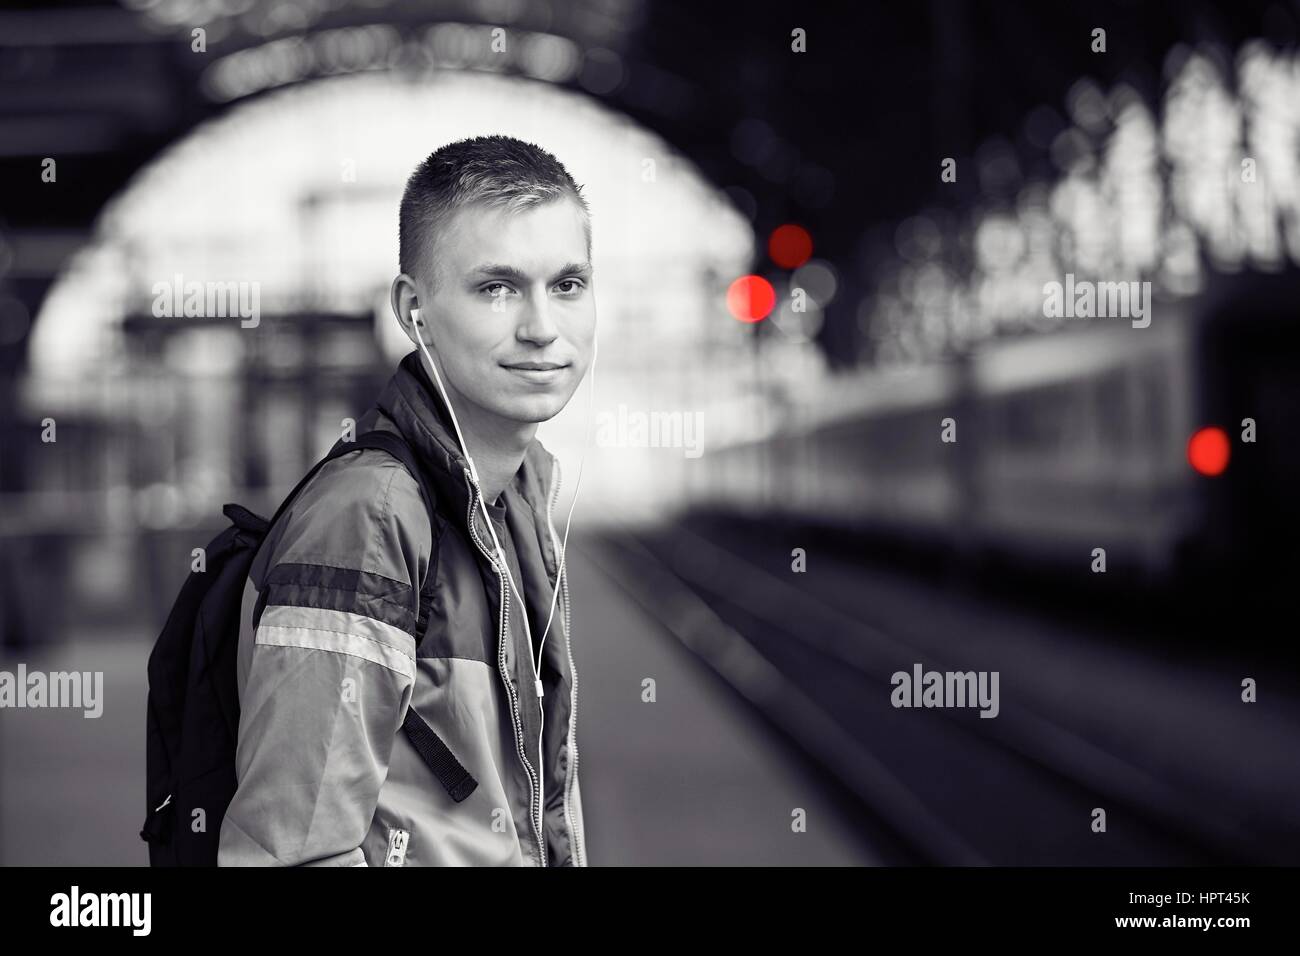 Young traveler is waiting at the railway station Stock Photo